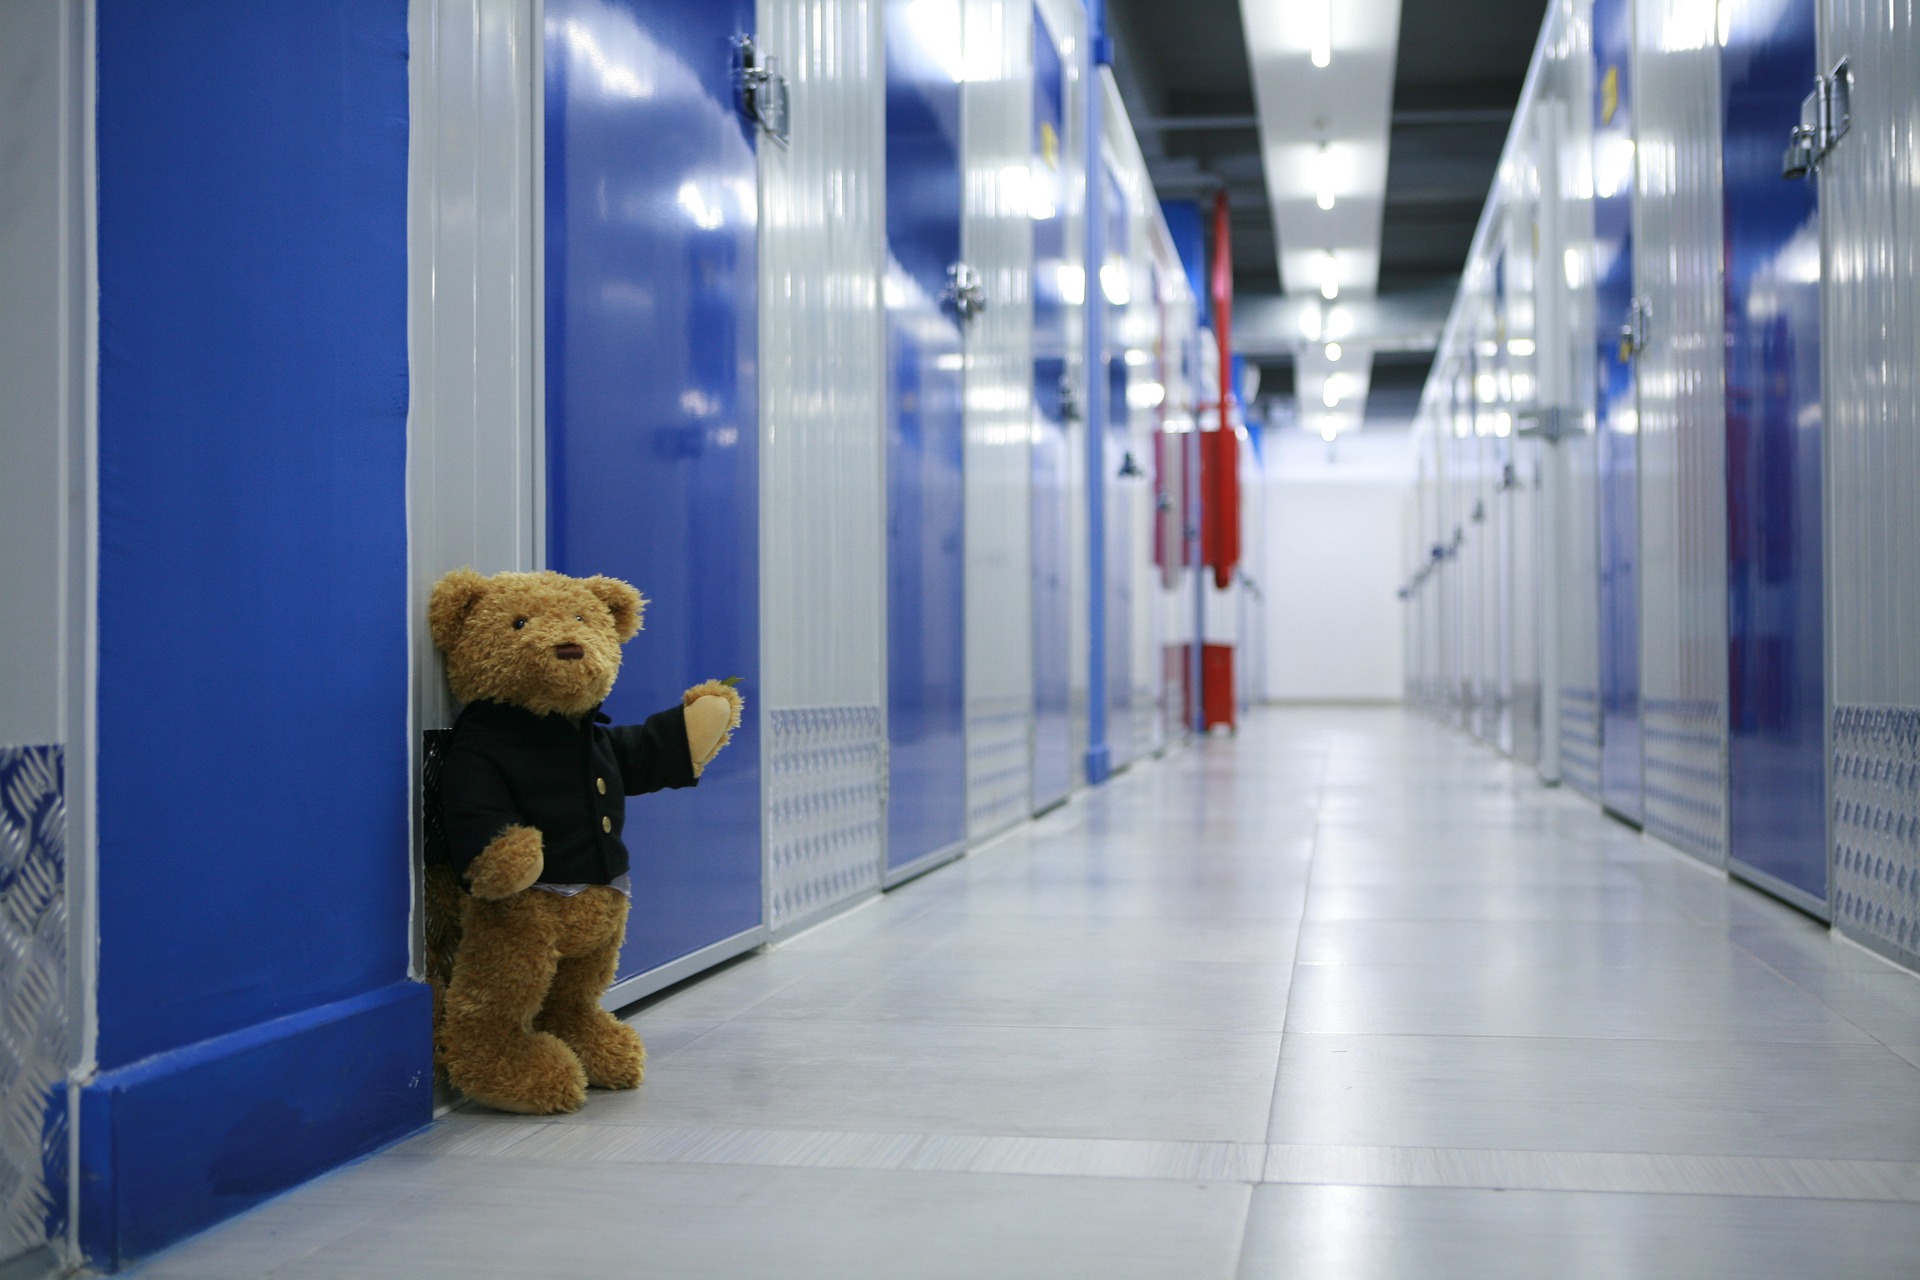 The Top 5 Amenities to Look for in Self-Storage Facilities